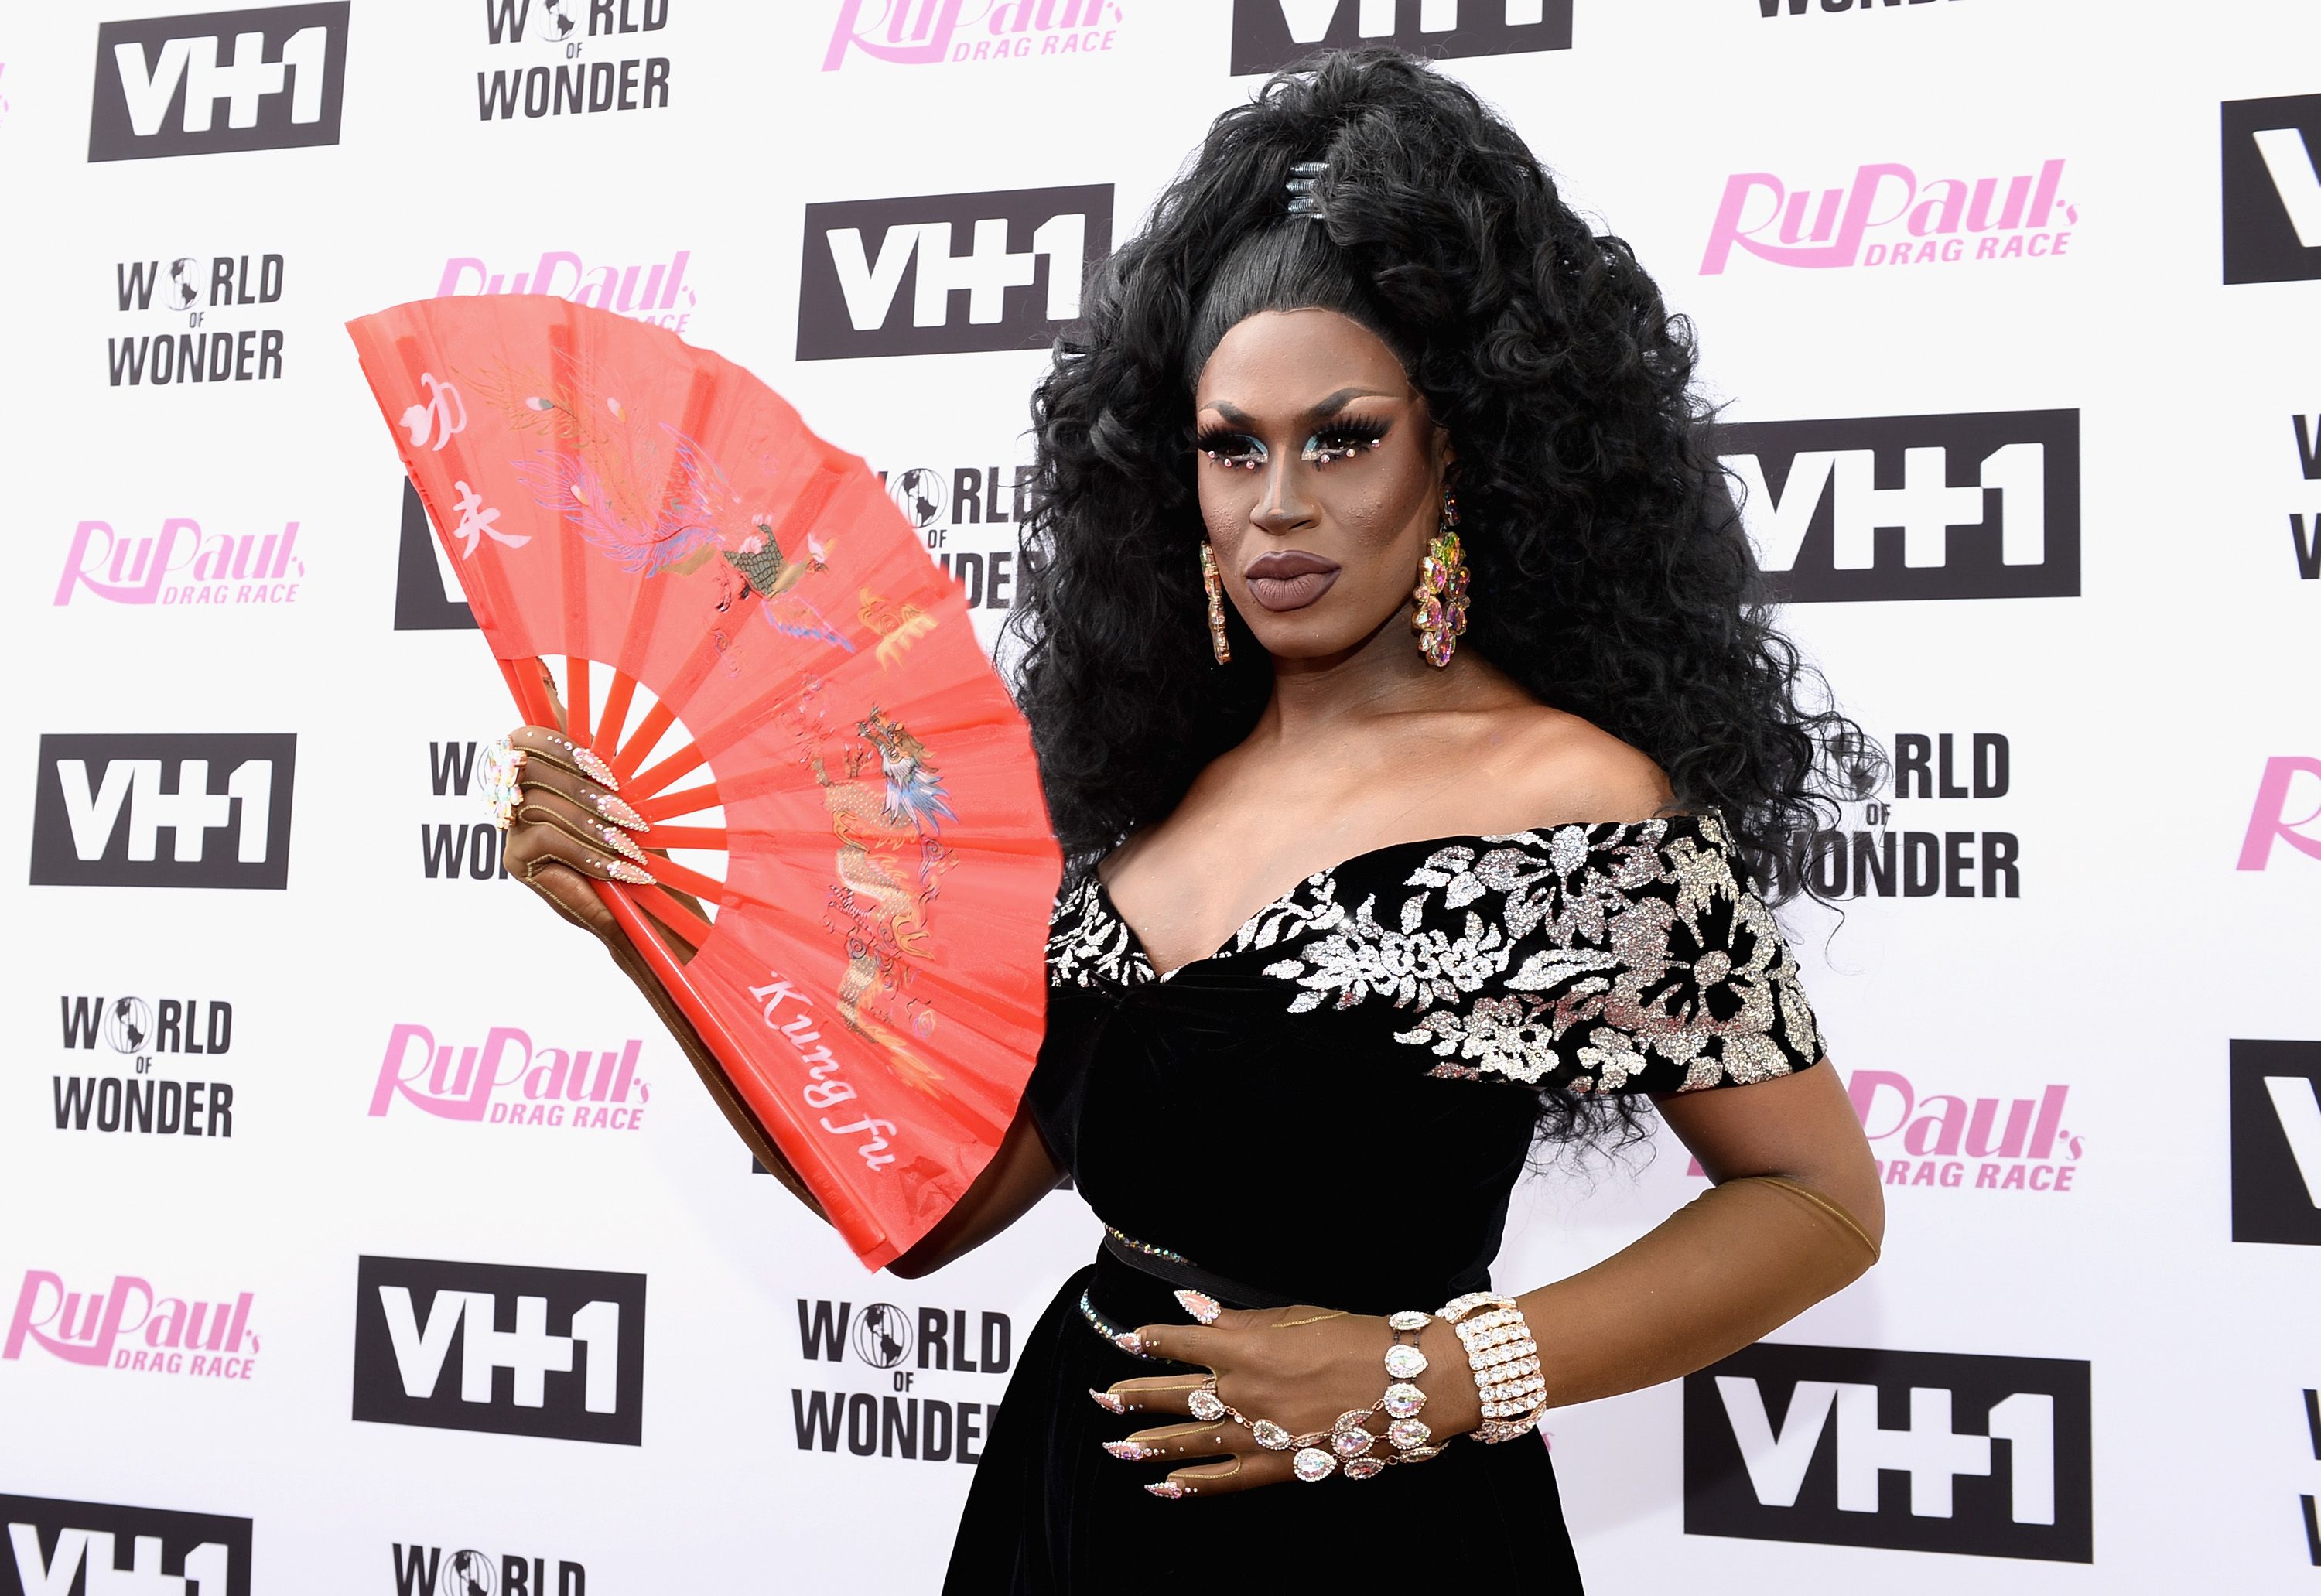 Drag Race's Shea Couleé discusses if she was robbed by Sasha